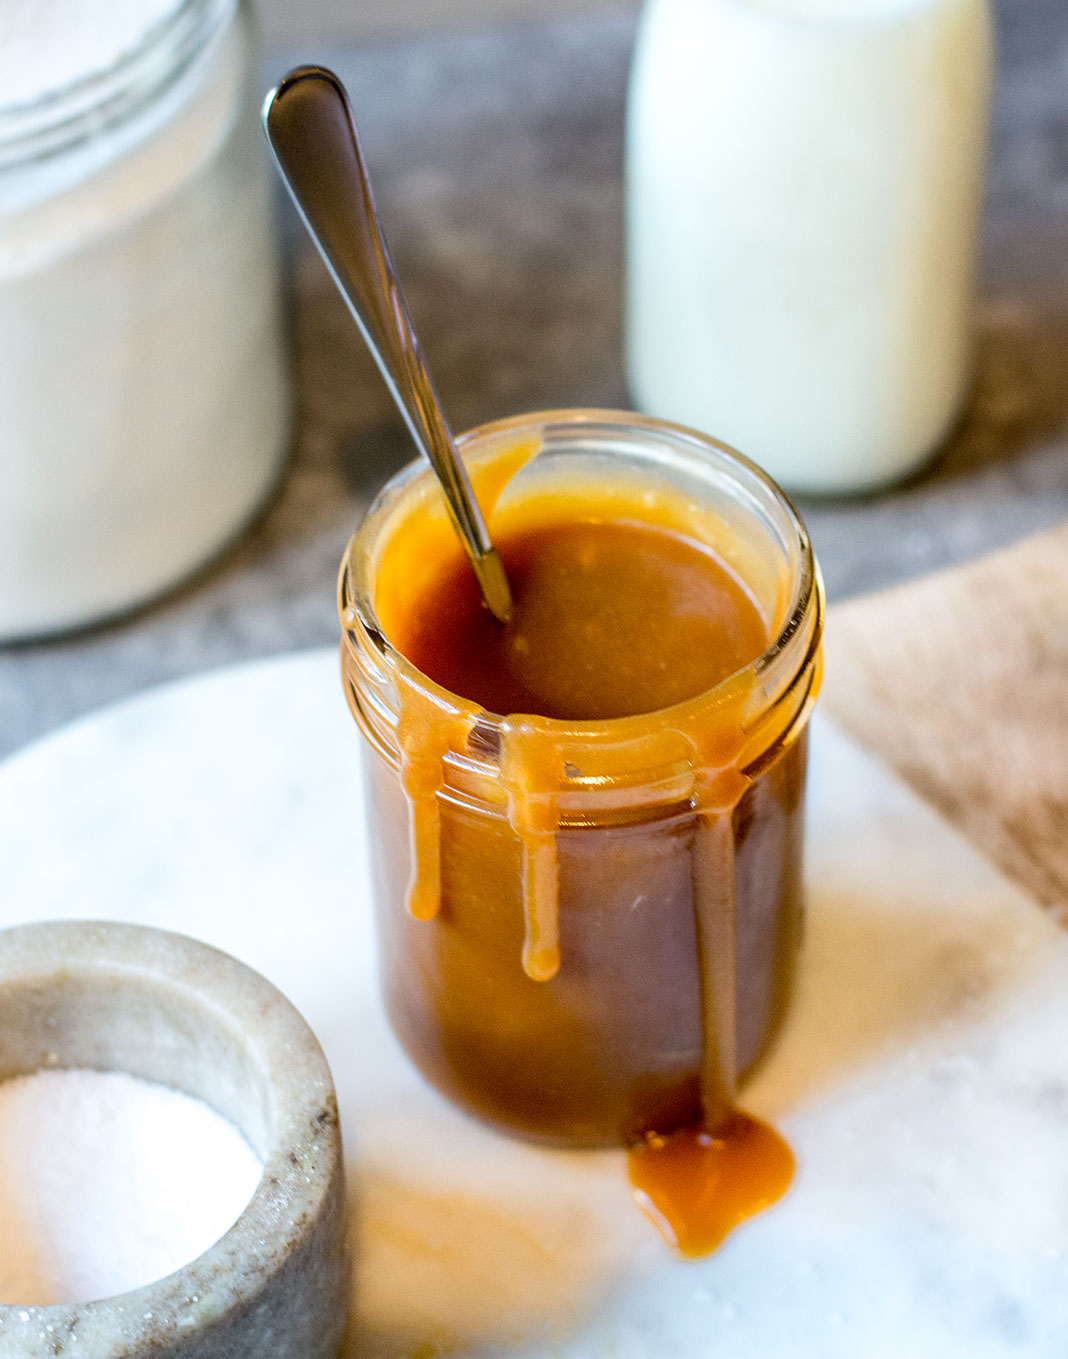 caramel sauce in glass jar dripping down sides